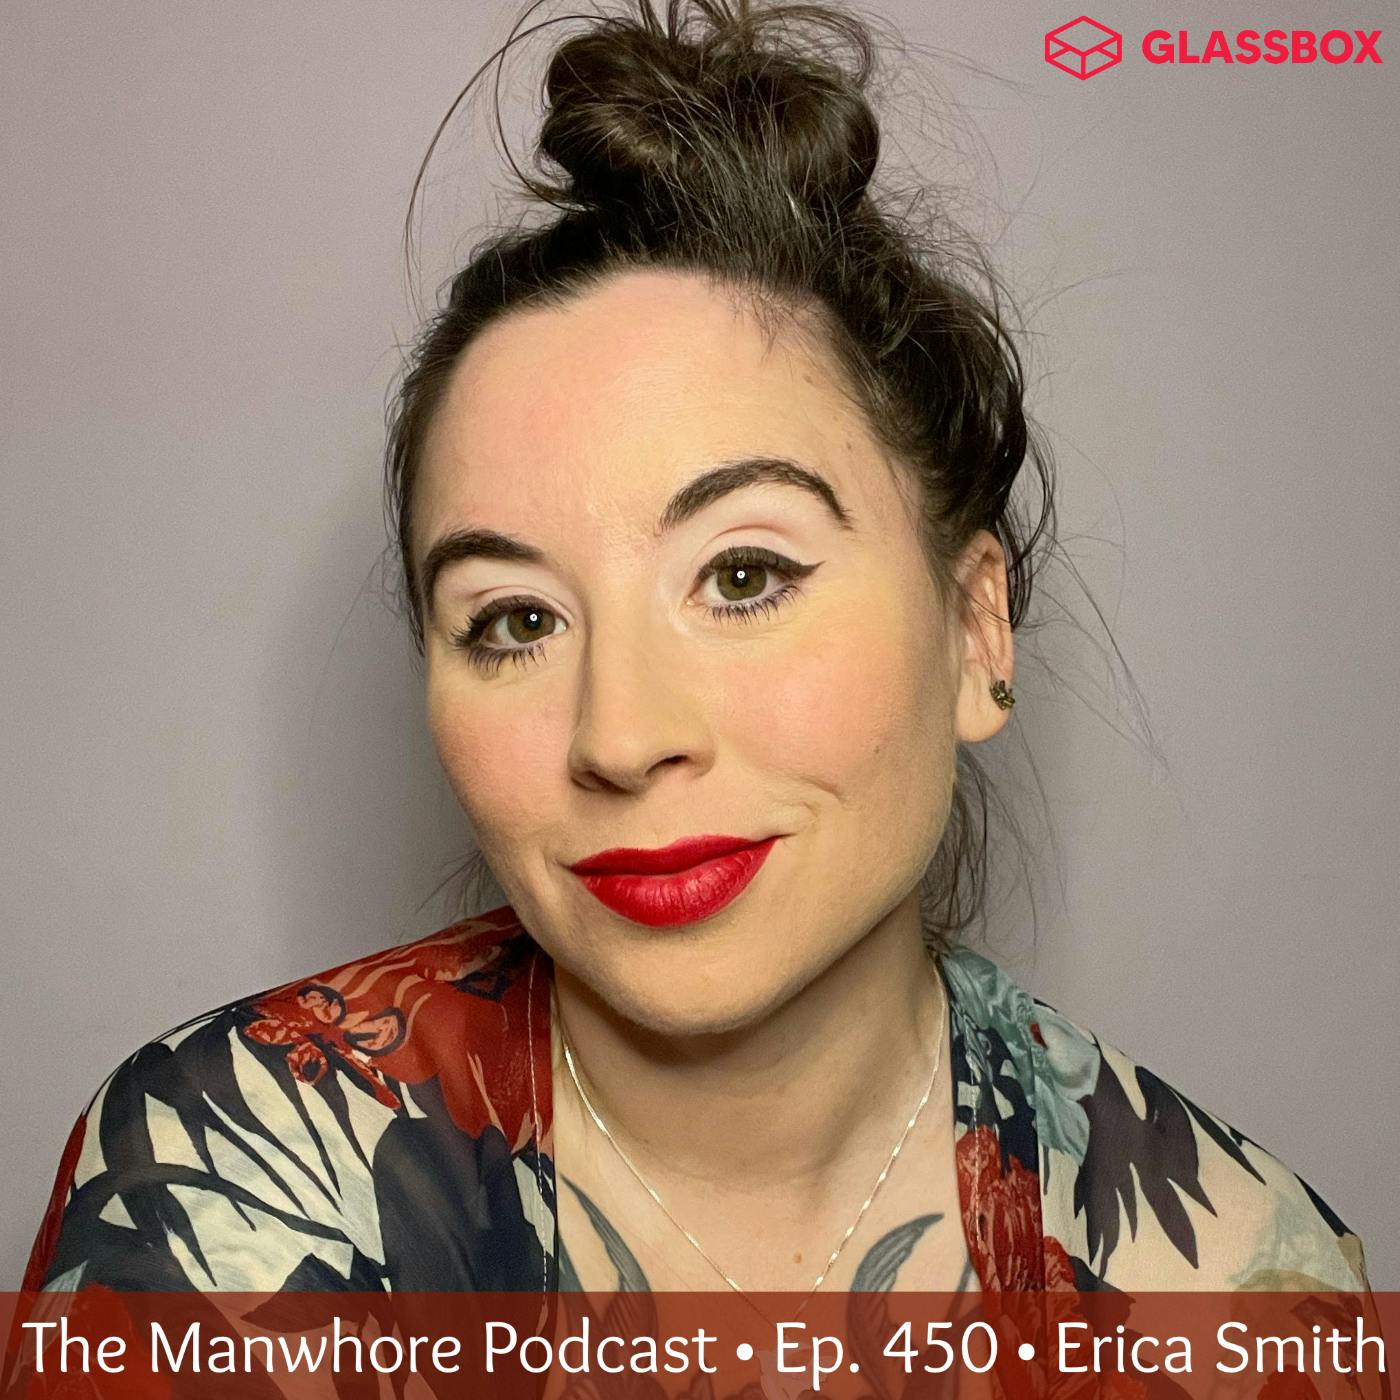 The Manwhore Podcast: A Sex-Positive Quest - Ep. 450: Slut-Positive Feminism with Sex Educator Erica Smith